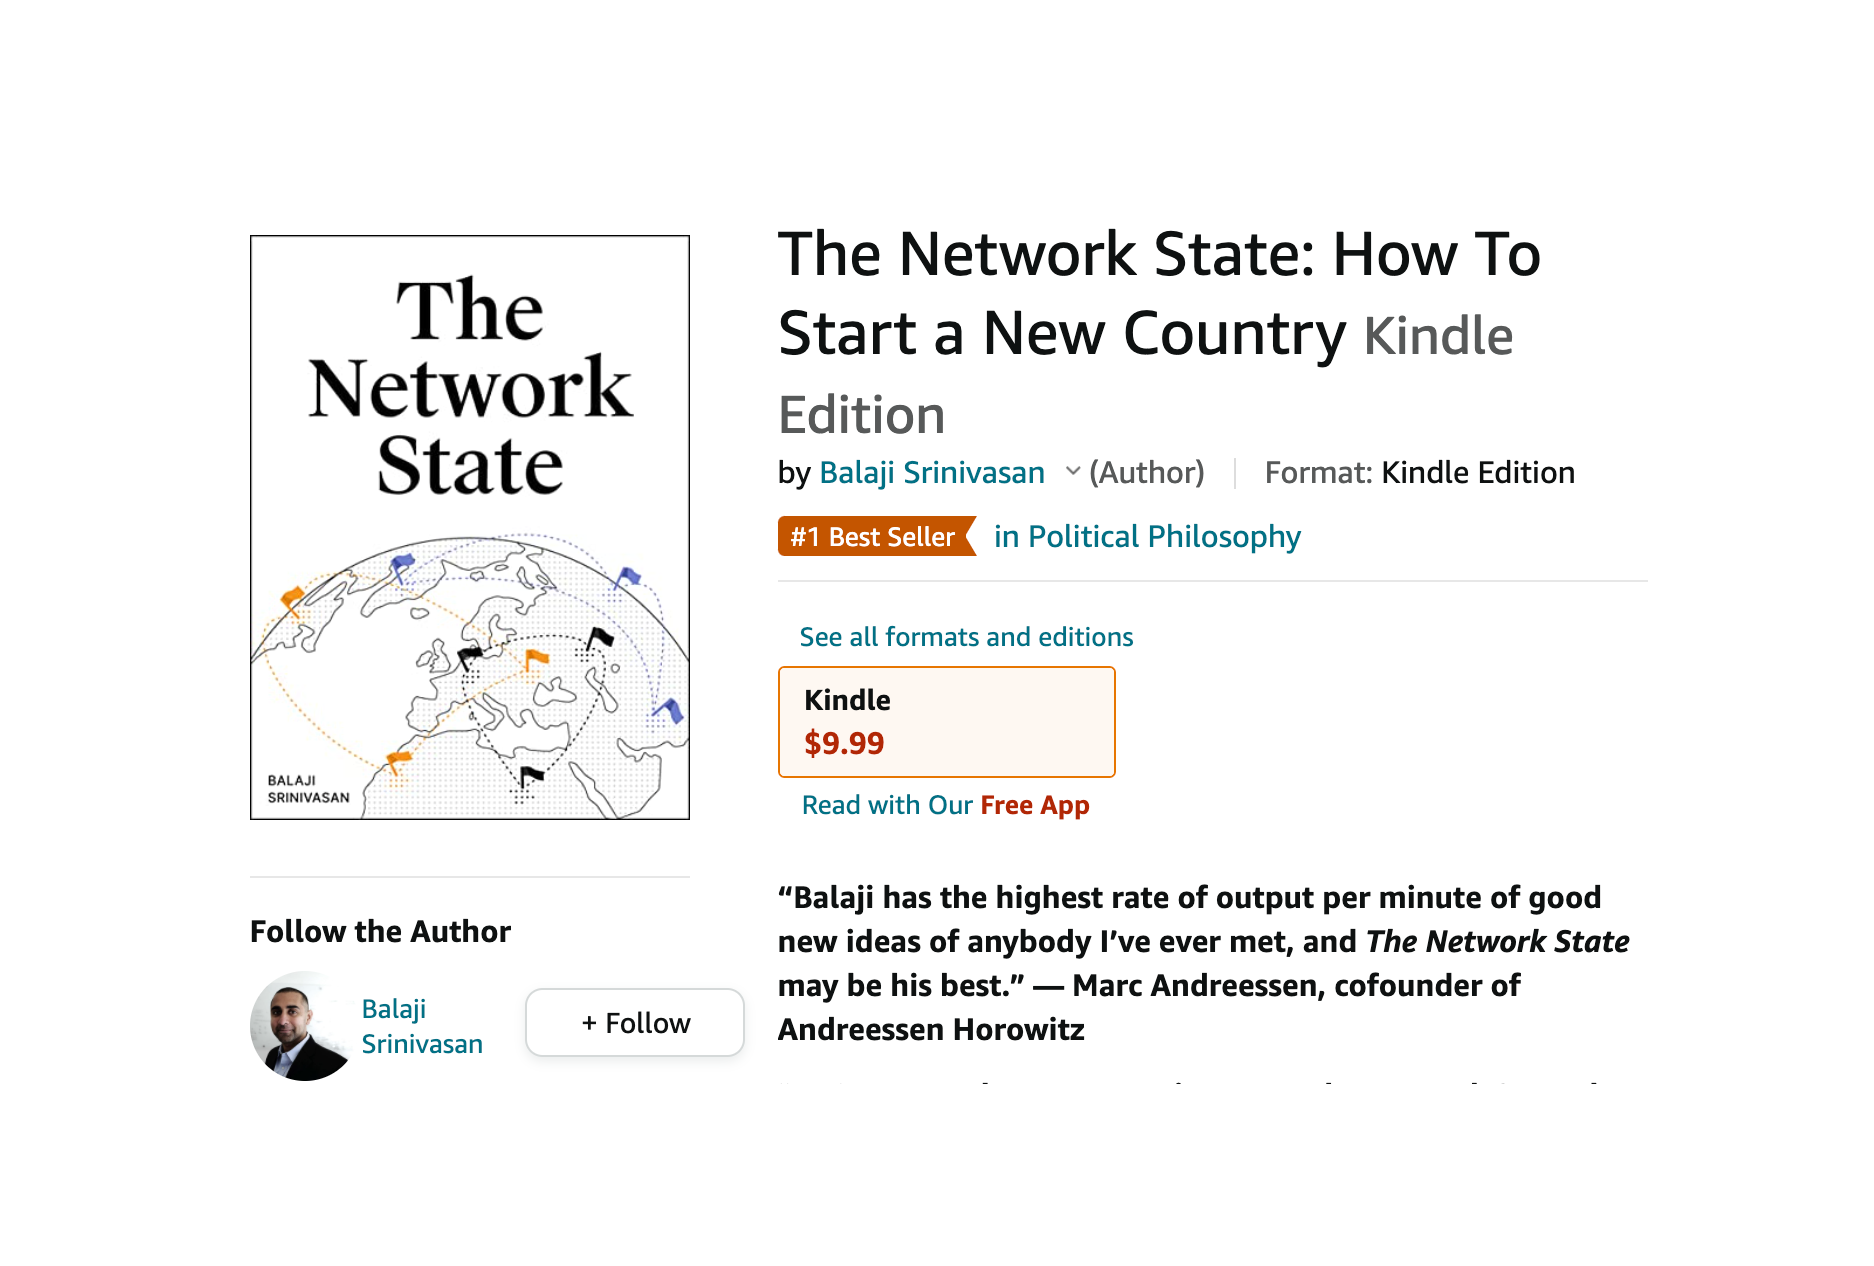 The Network State Book